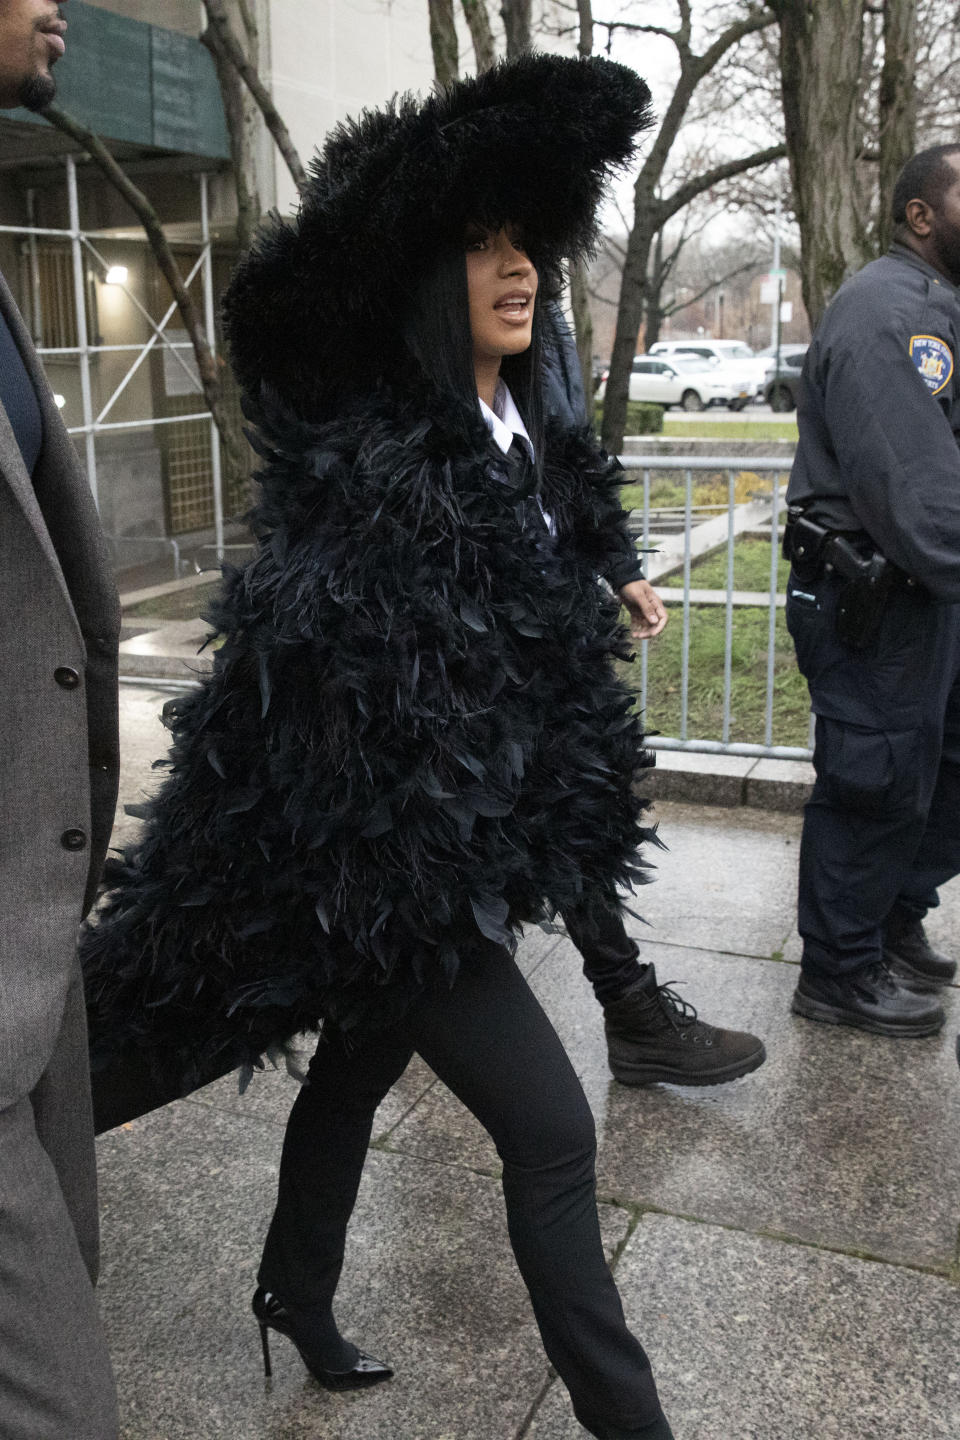 Rapper Cardi B leaves Queens Criminal Court after a hearing, Tuesday, Dec. 10, 2019 in New York. (AP Photo/Mark Lennihan)